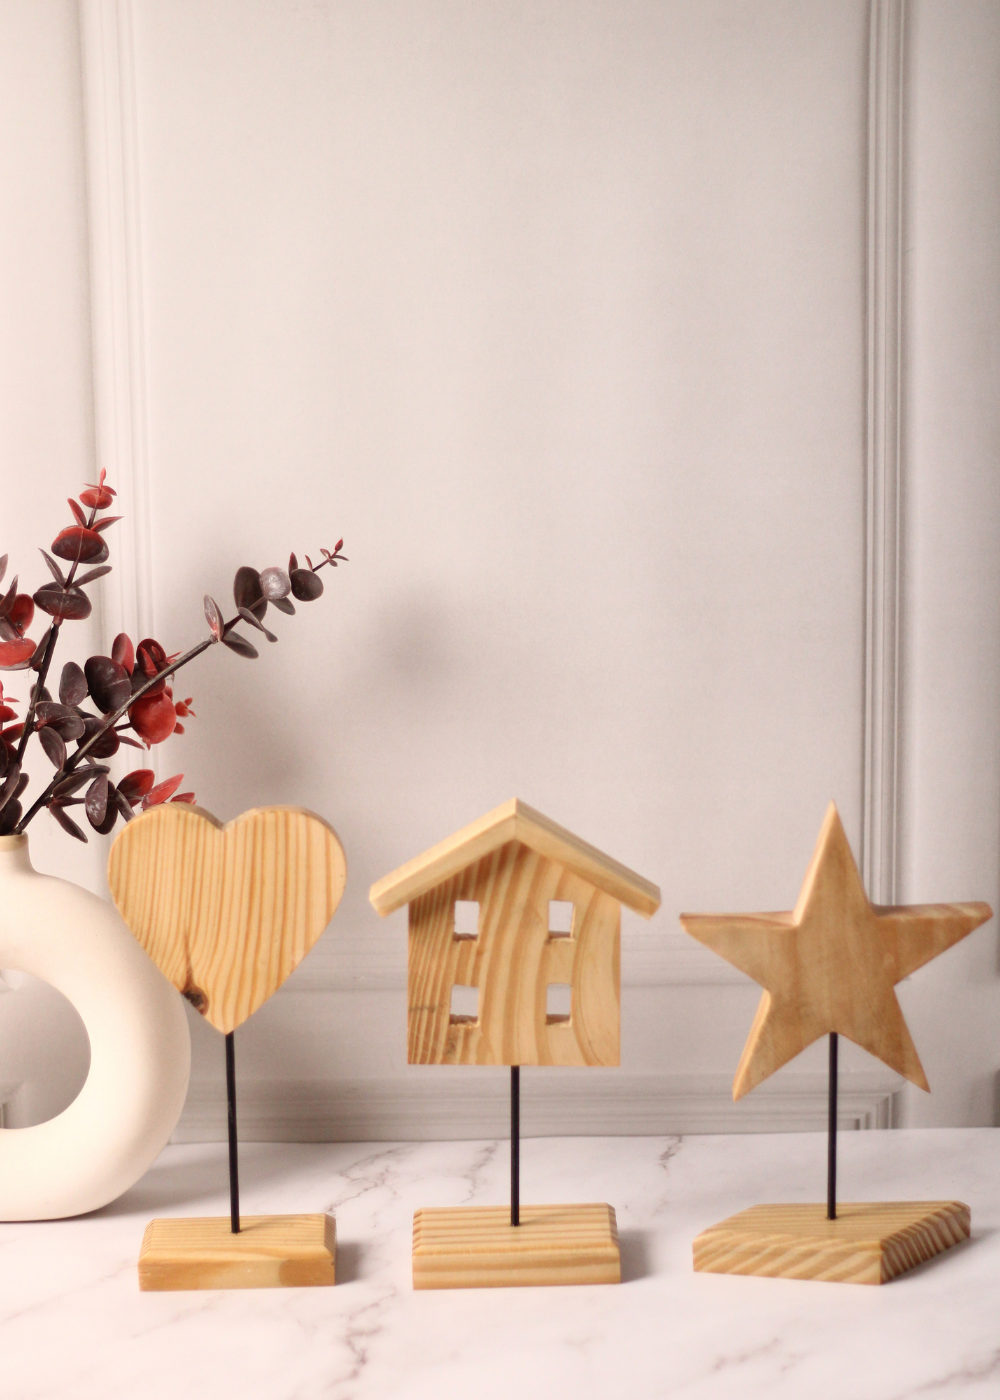 Wooden Star Stand